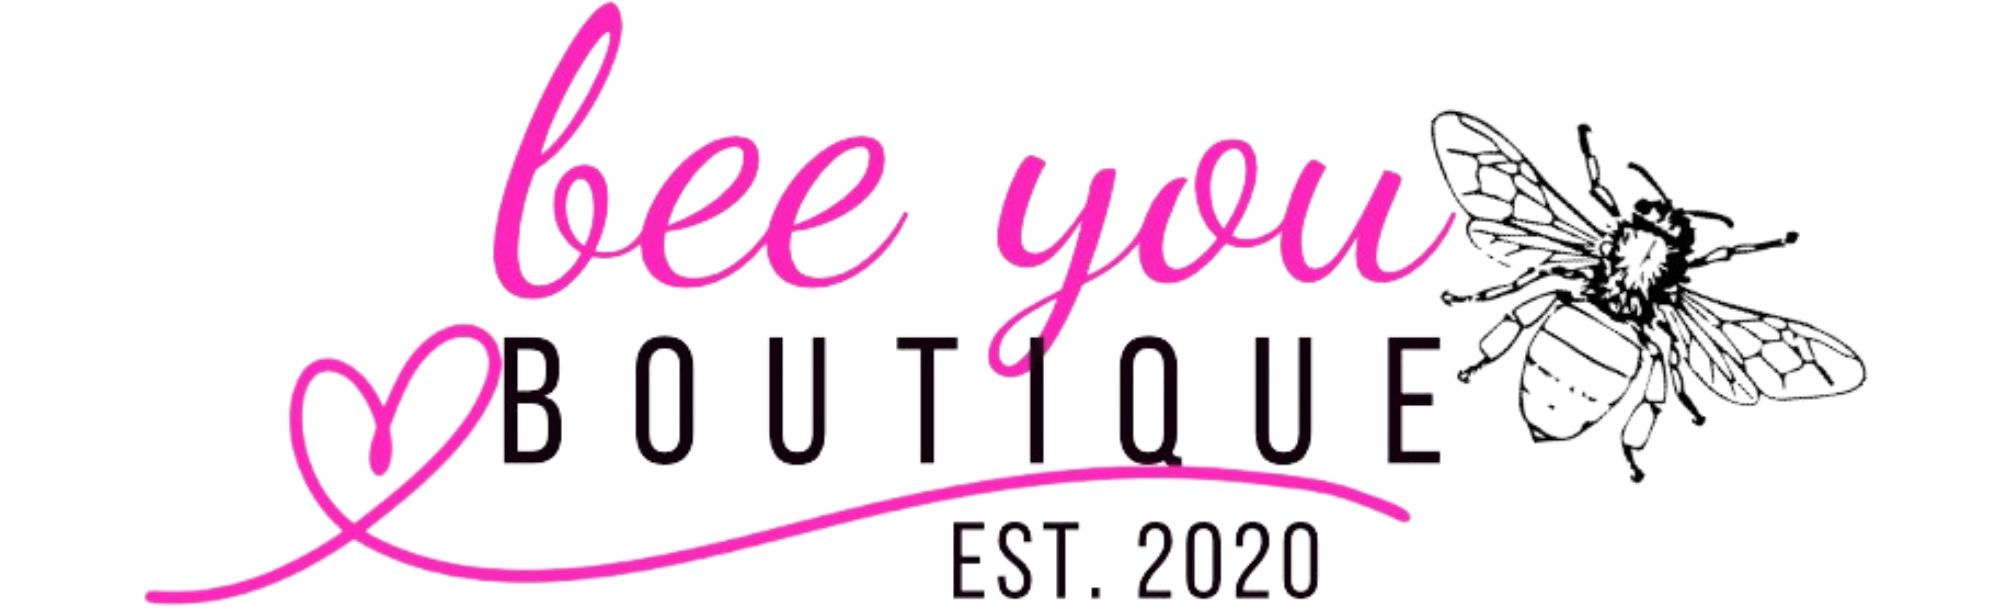 Bee You Boutique